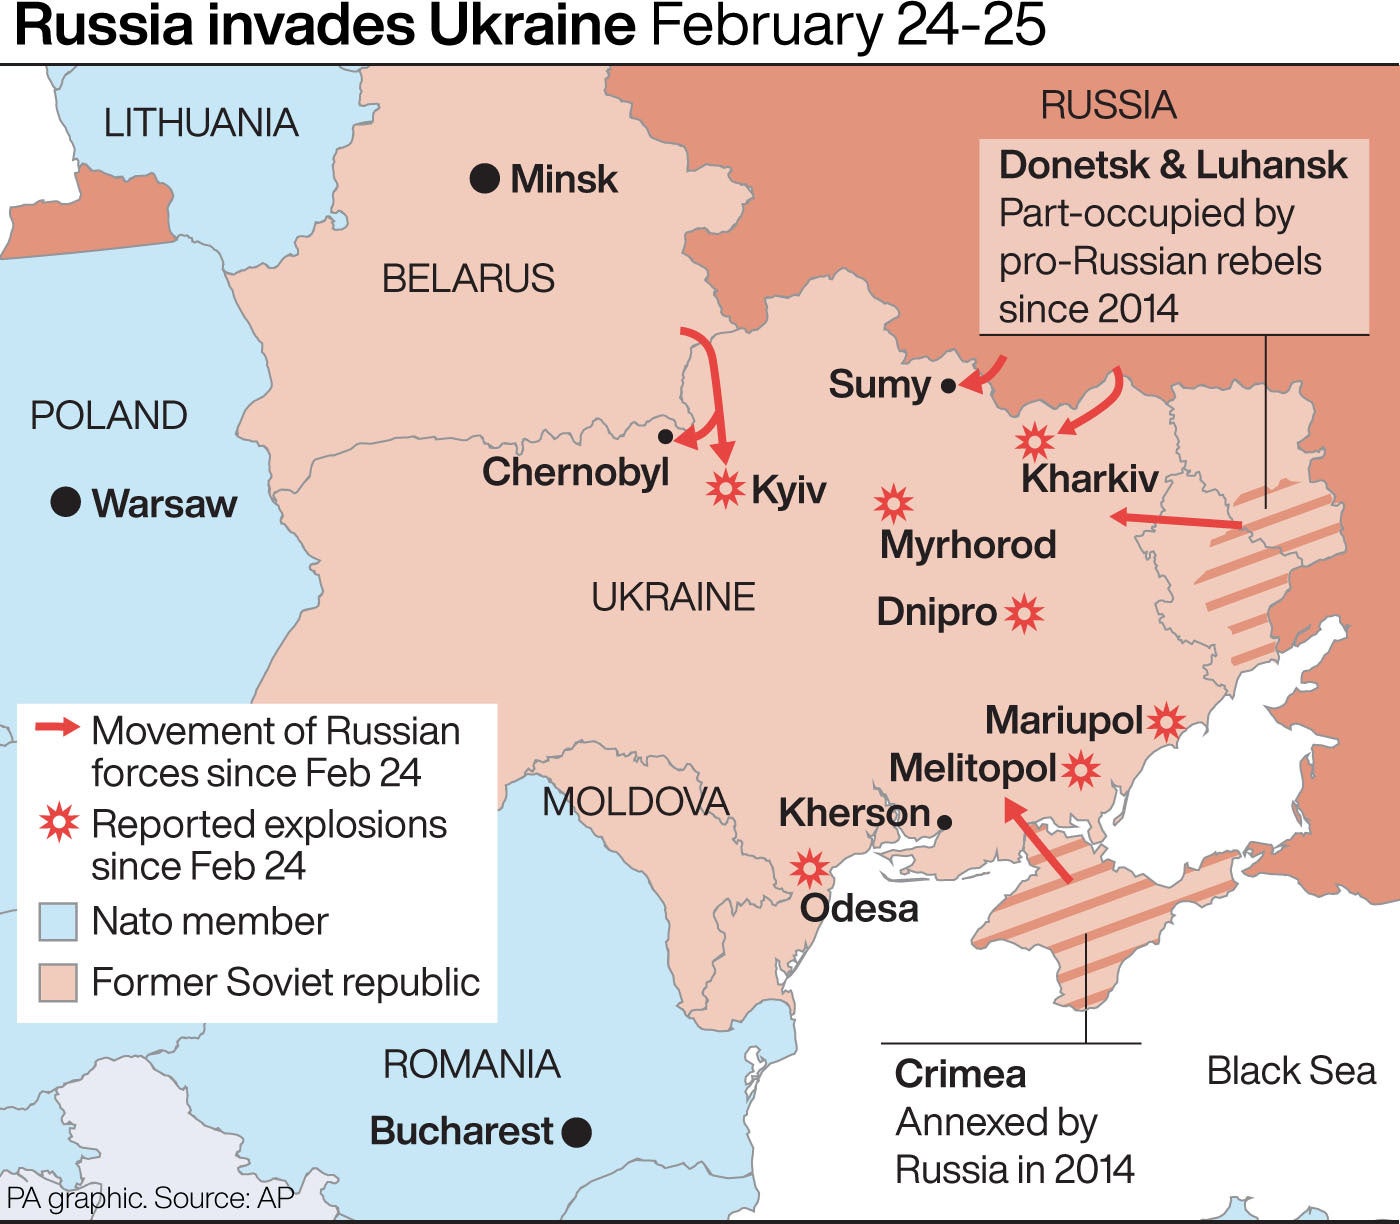 Russian forces’ movements since the invasion began